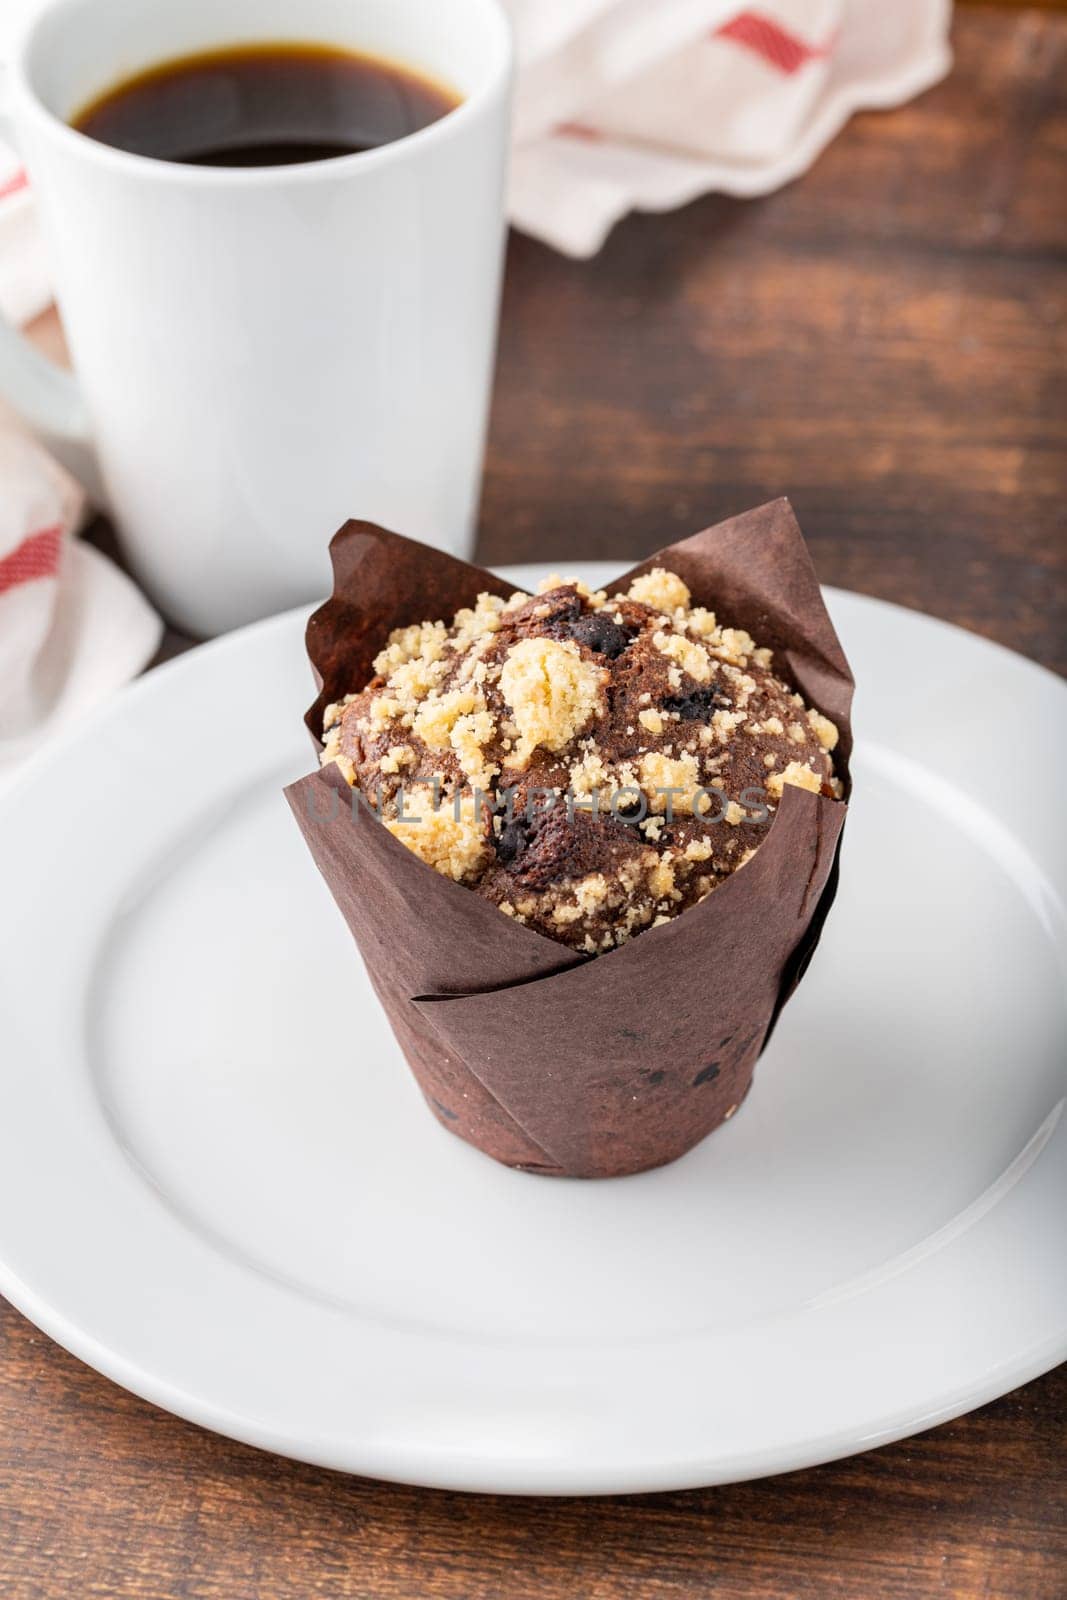 Chocolate muffin or cupcake with coffee on wooden table